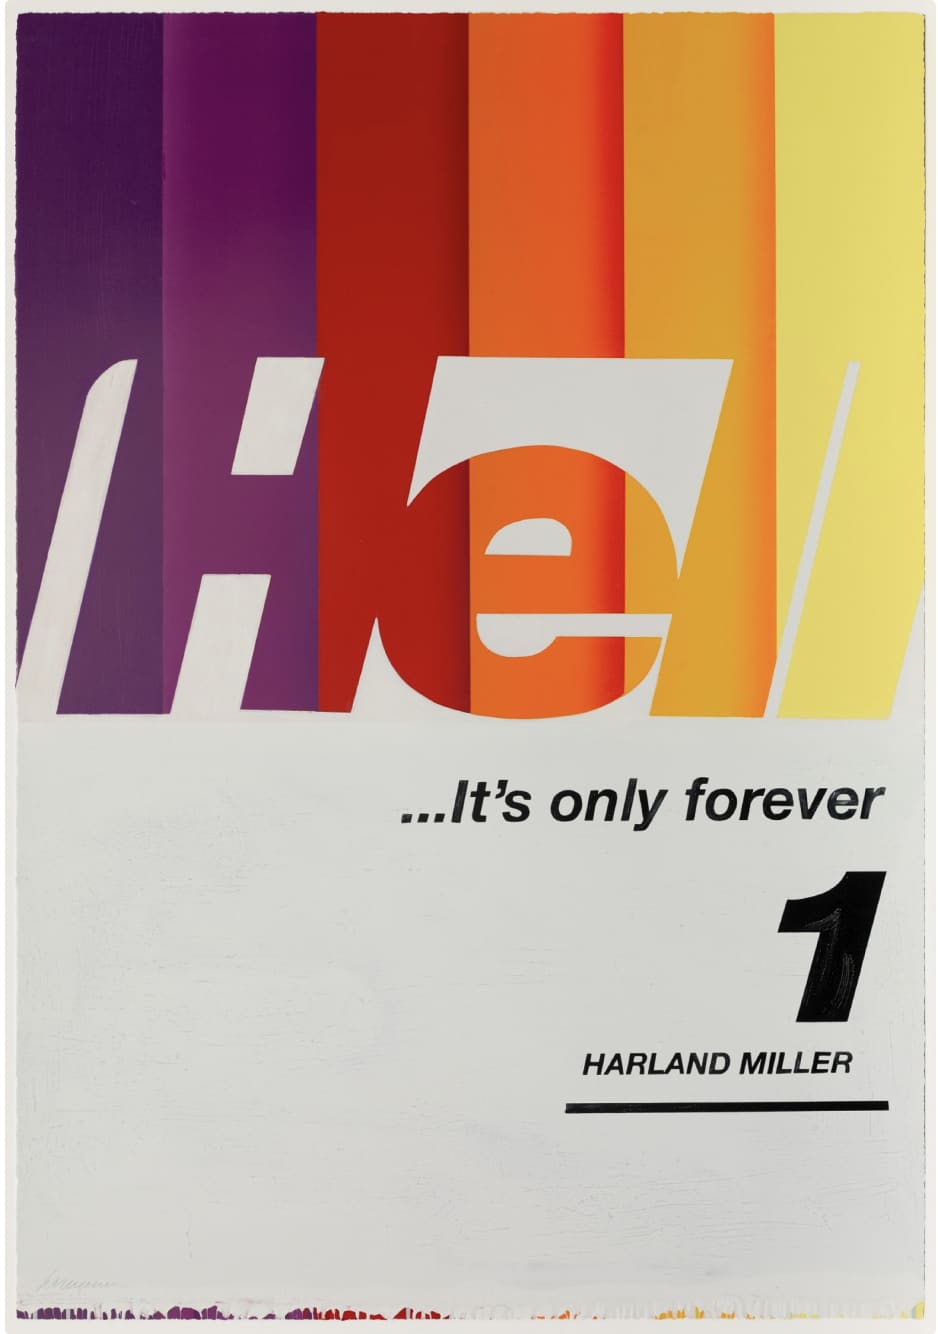 Harland Miller, Hell... It's Only Forever 1 (large), 2020